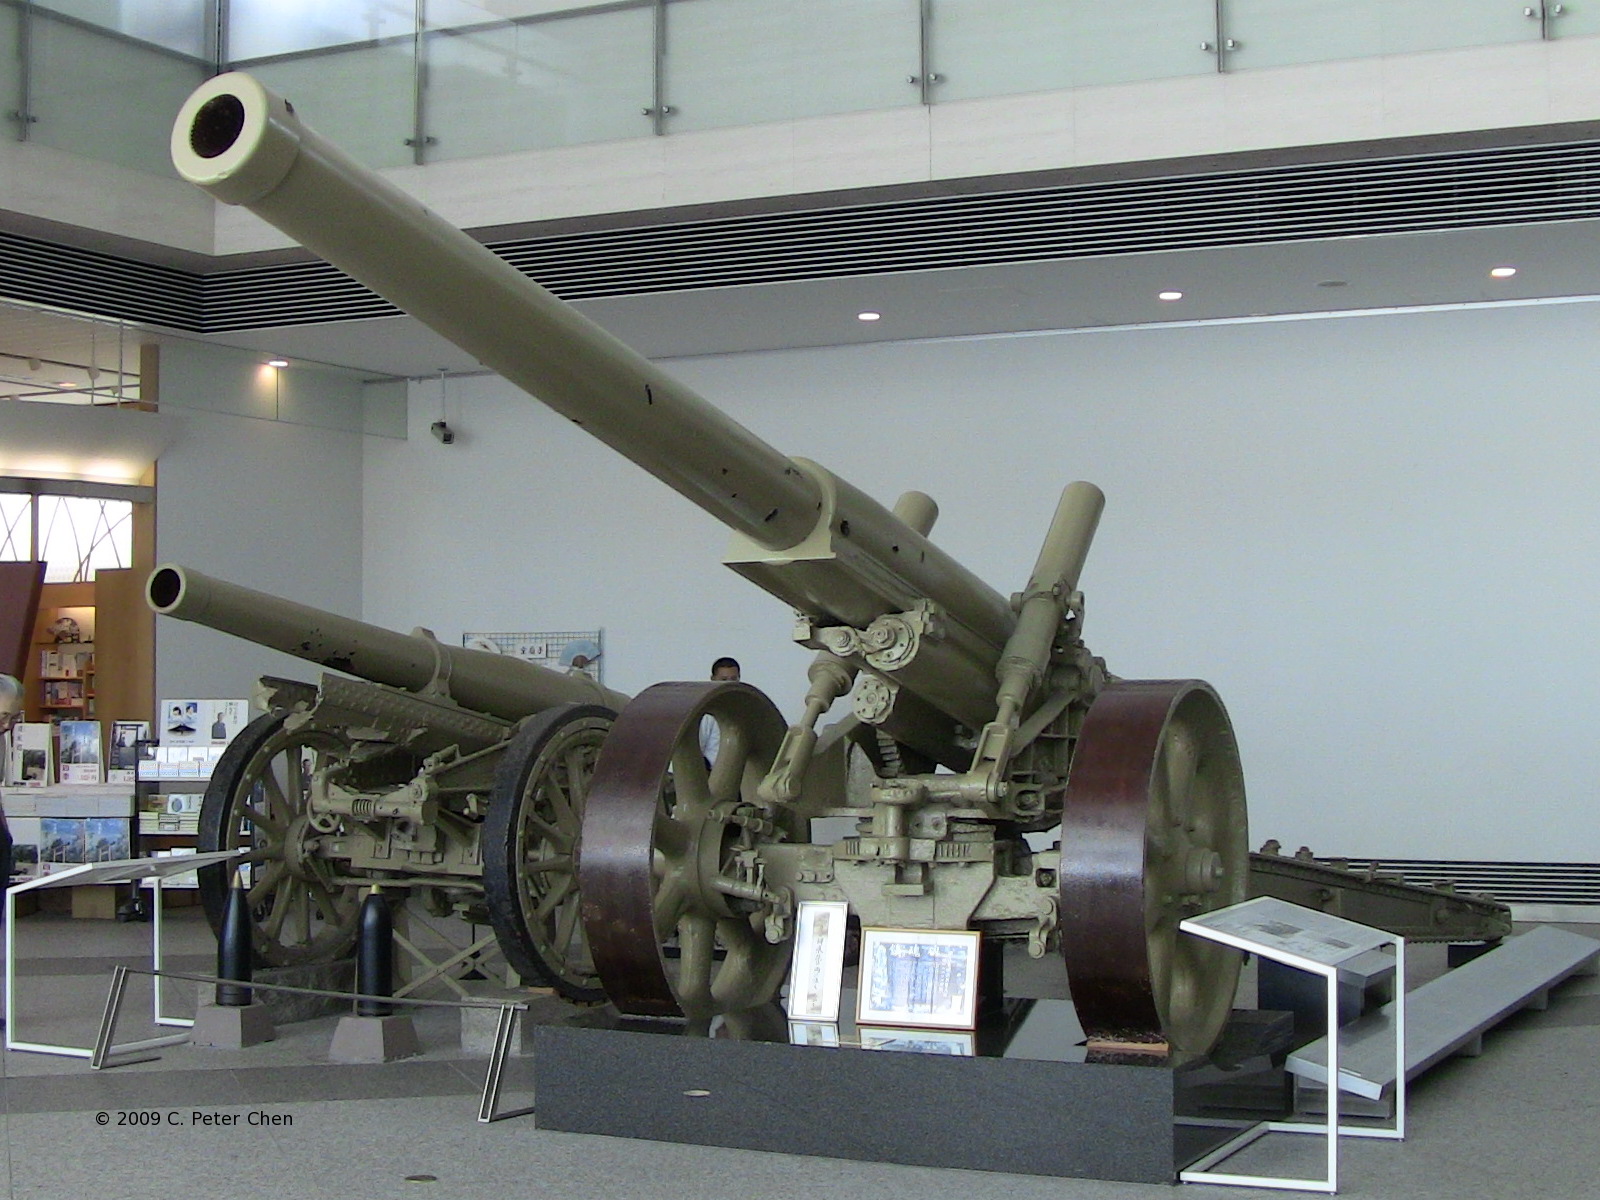 Type 89 15-cm cannon on display at Yushukan Museum, Tokyo, Japan, 7 Sep 2009, photo 1 of 3; note Type 96 15-cm howitzer in background